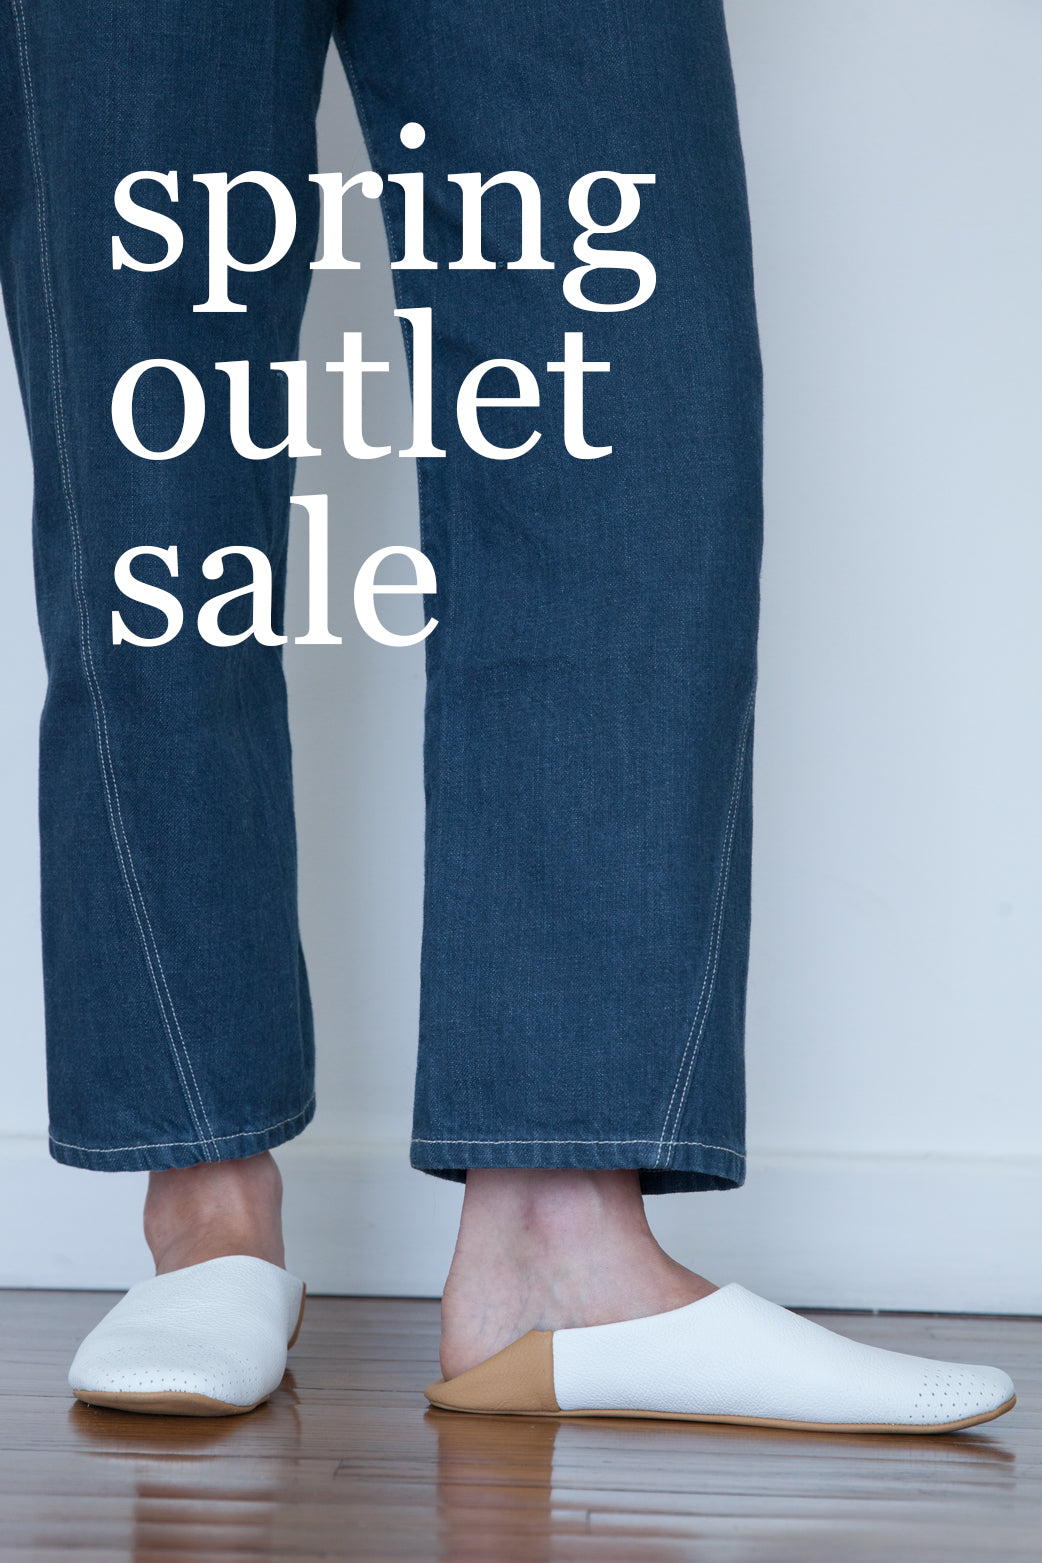 Outlet sale on spring house slippers